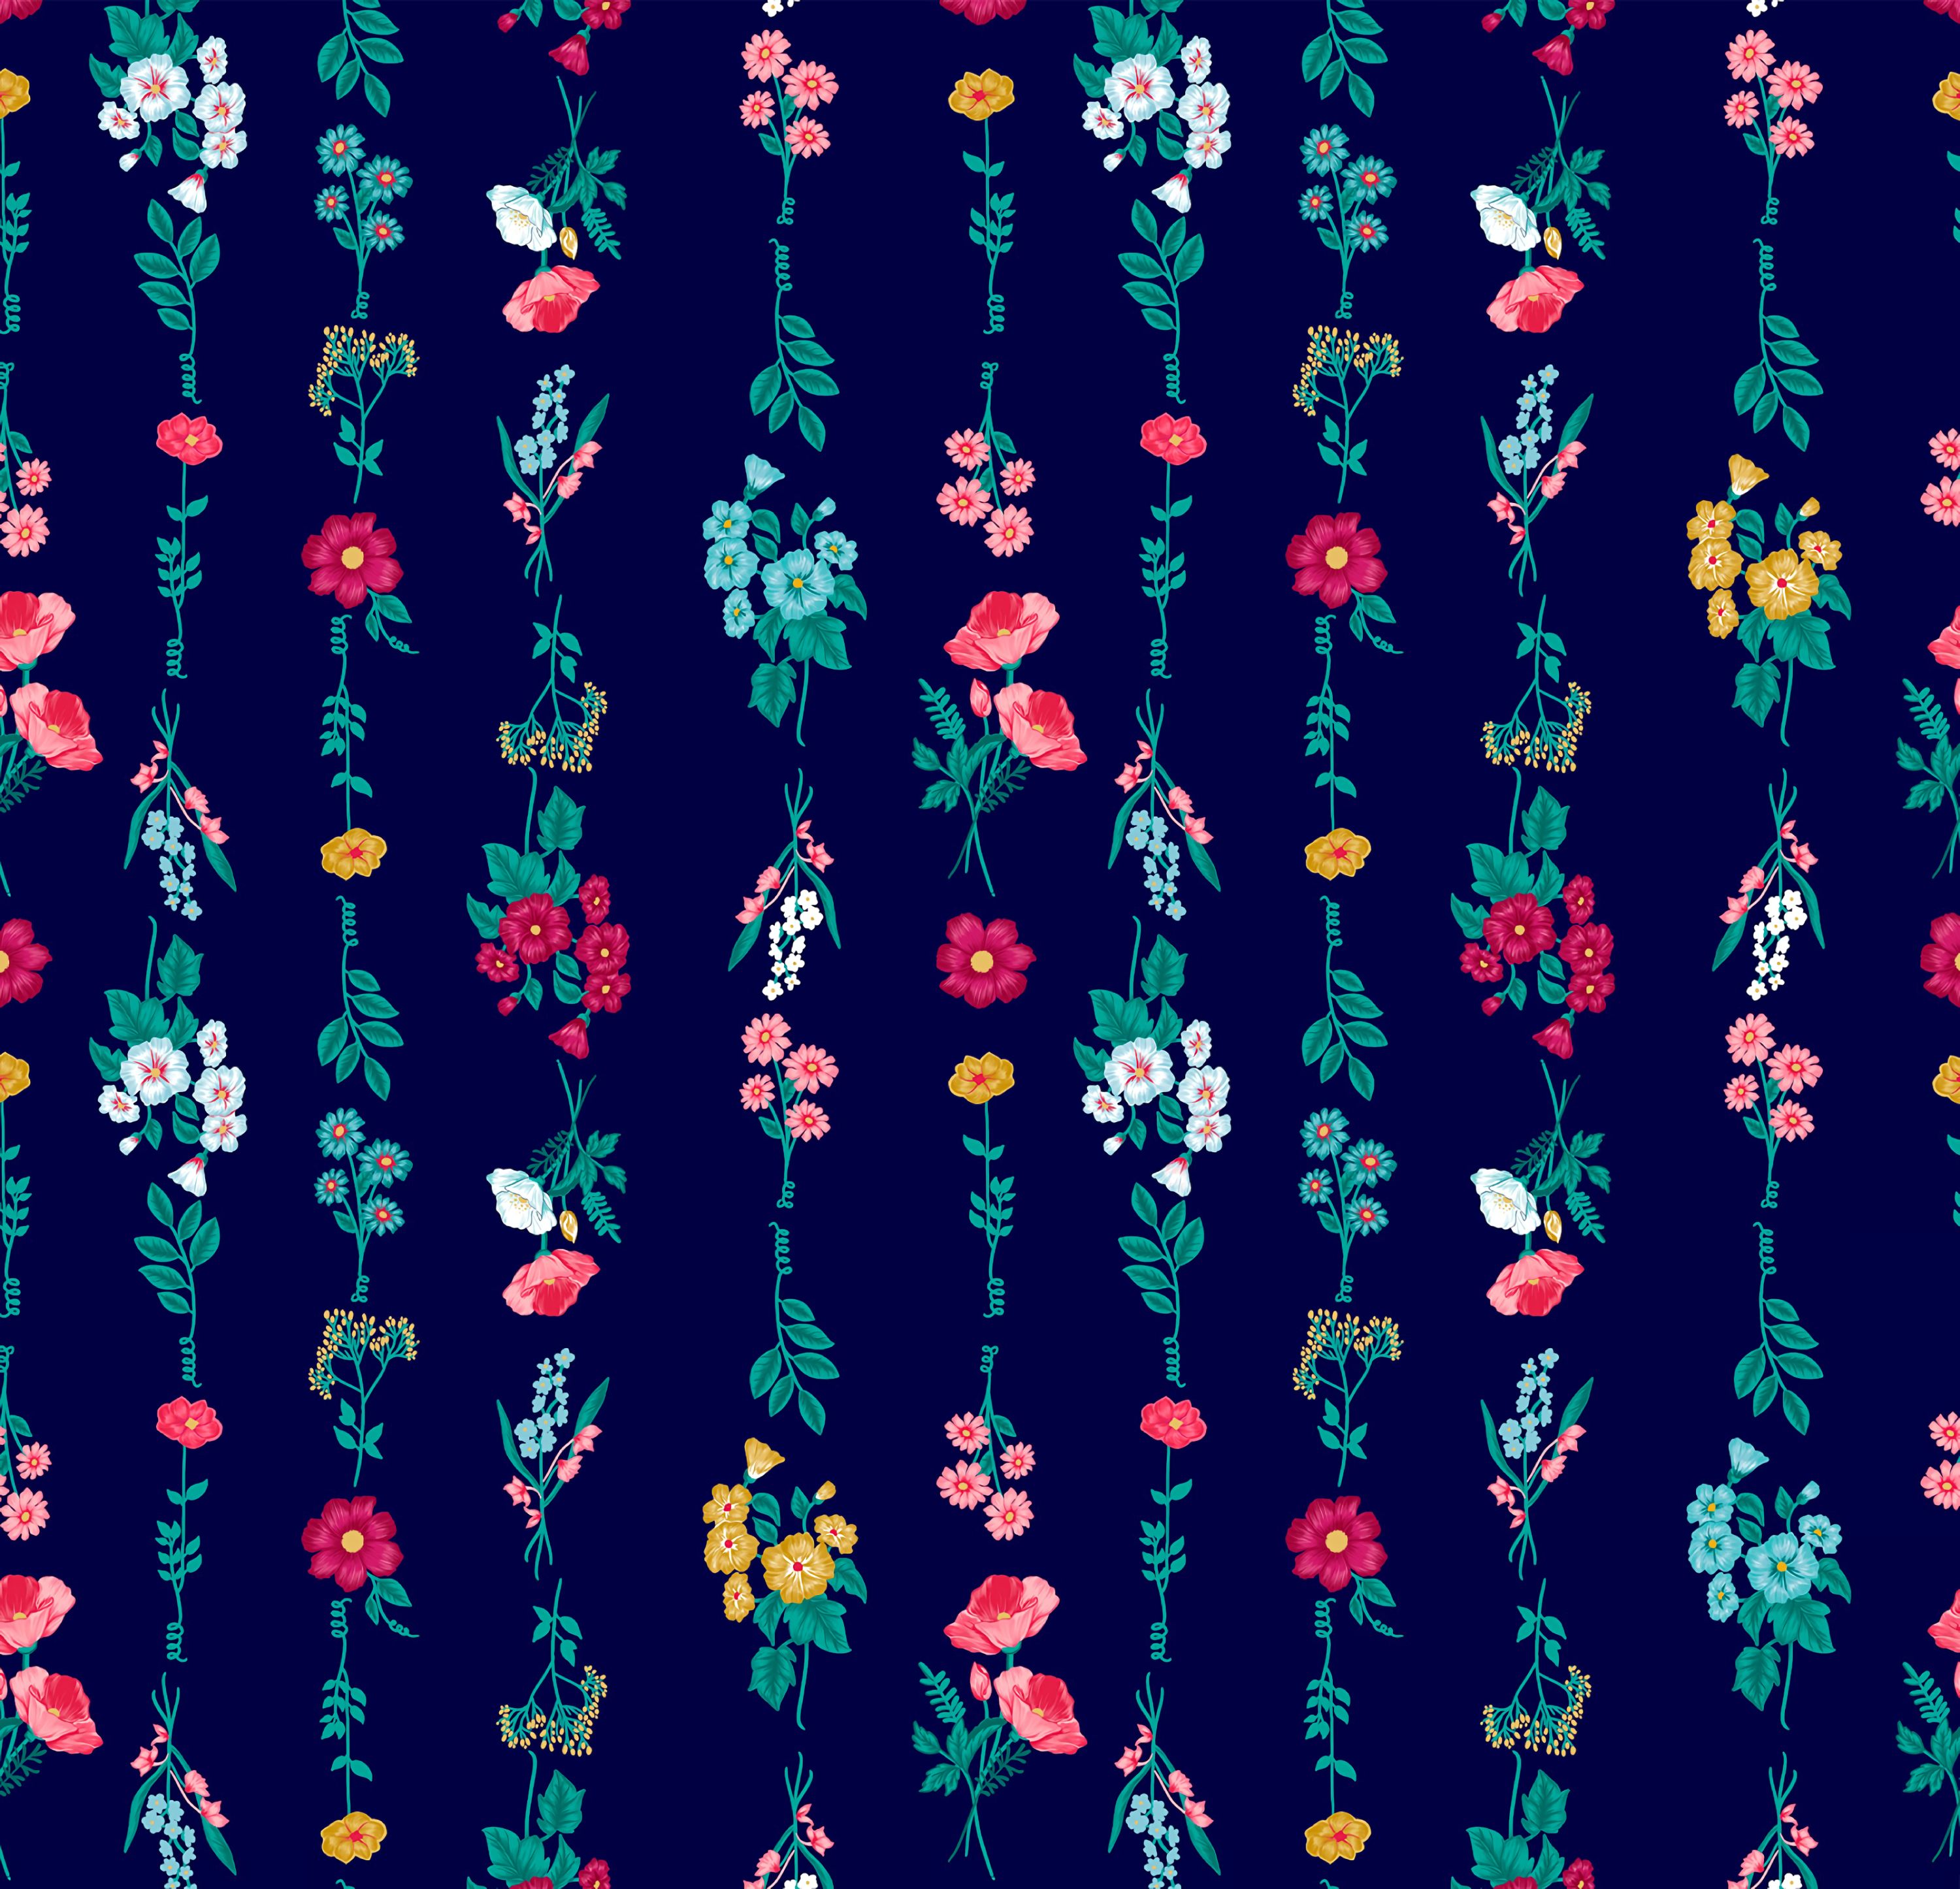 73052 download wallpaper pattern, bouquets, flowers, multicolored, motley, texture, textures screensavers and pictures for free